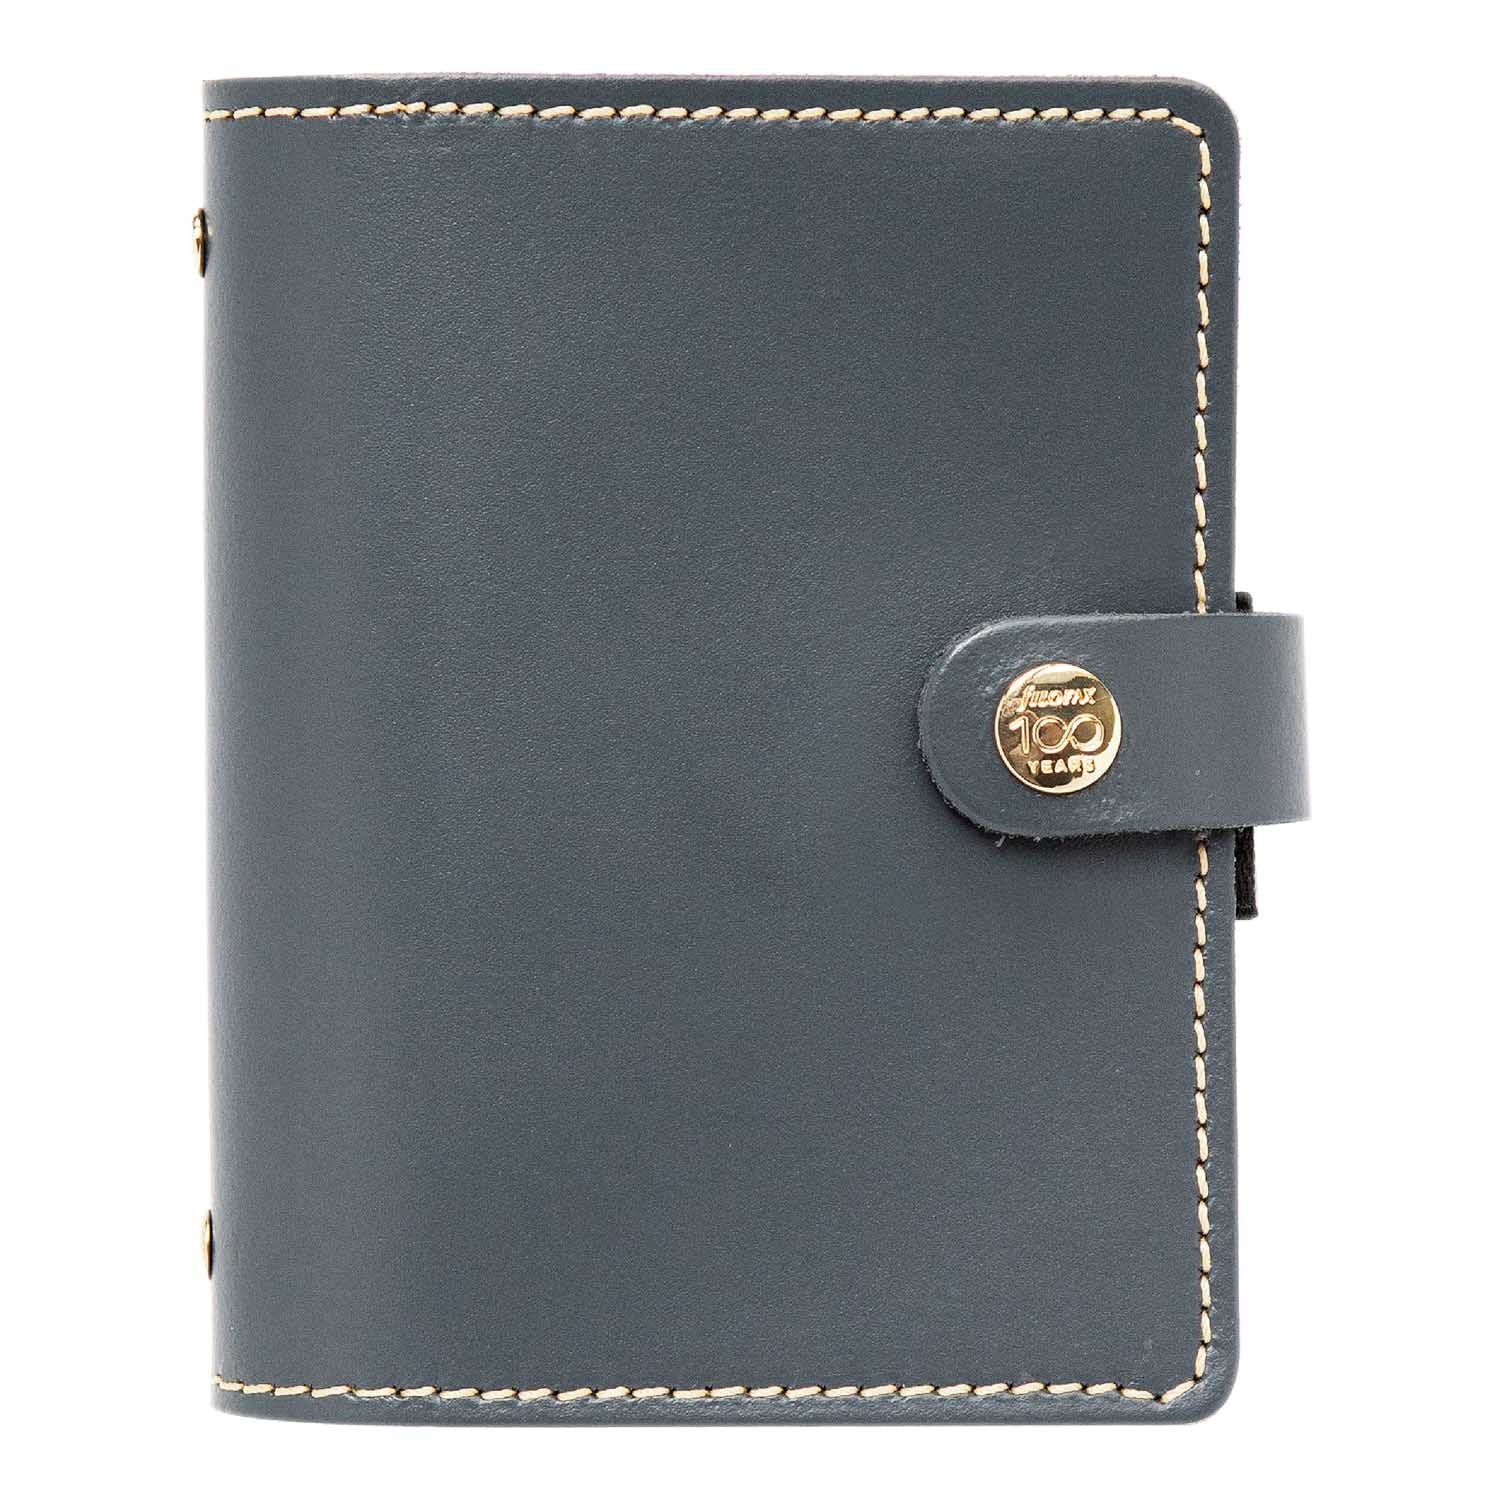 Filofax Centennial Limited Edition The Original Pocket Leather Organizer Charcoal Front